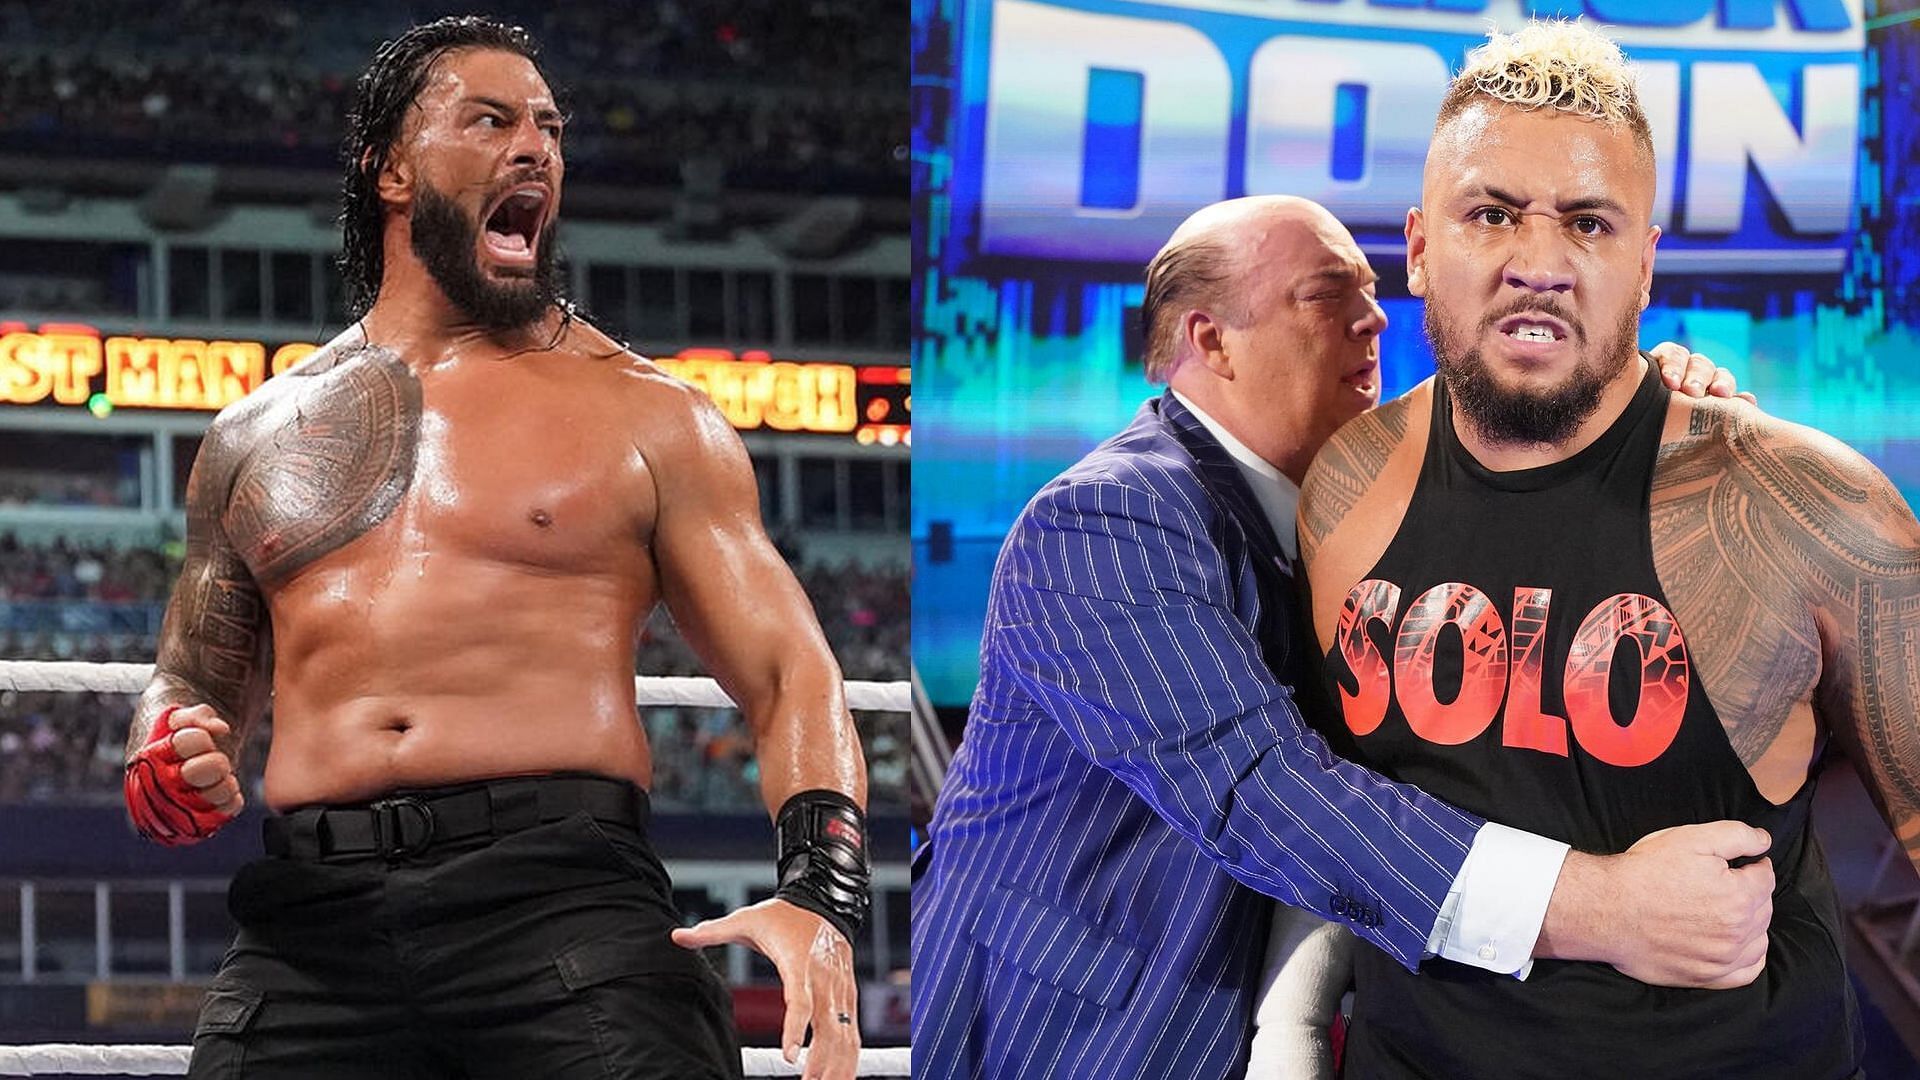 Roman Reigns could return alongside a new teammate to counter Solo Sikoa on WWE SmackDown